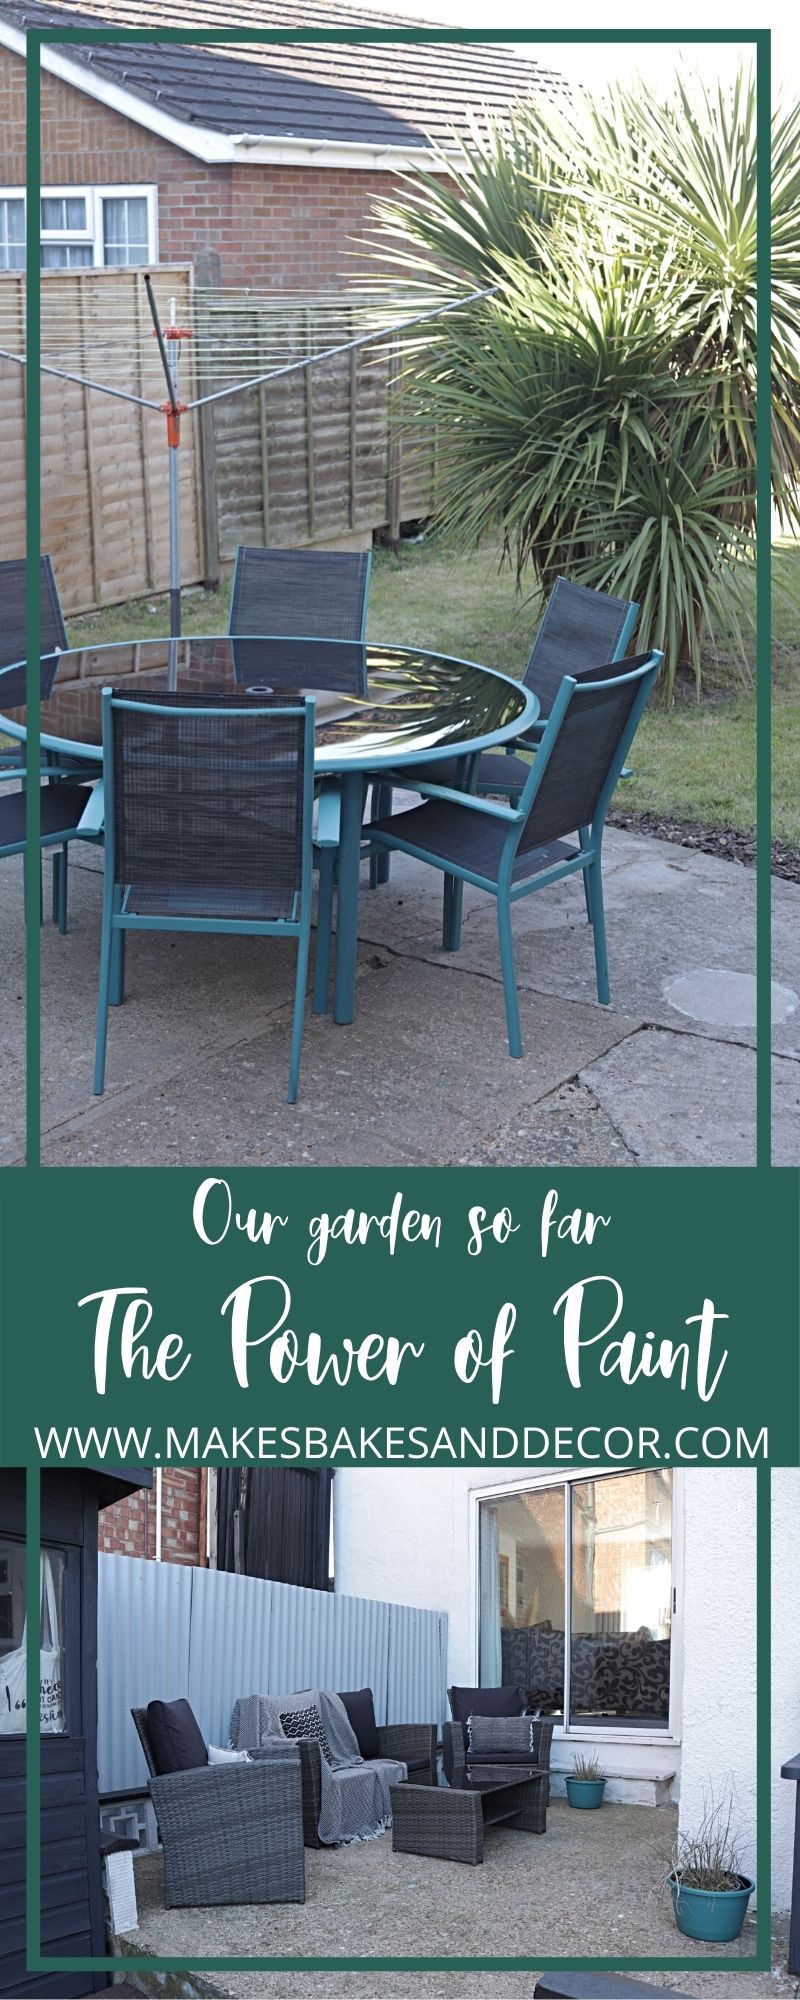 Our Garden so far - the power of paint pin